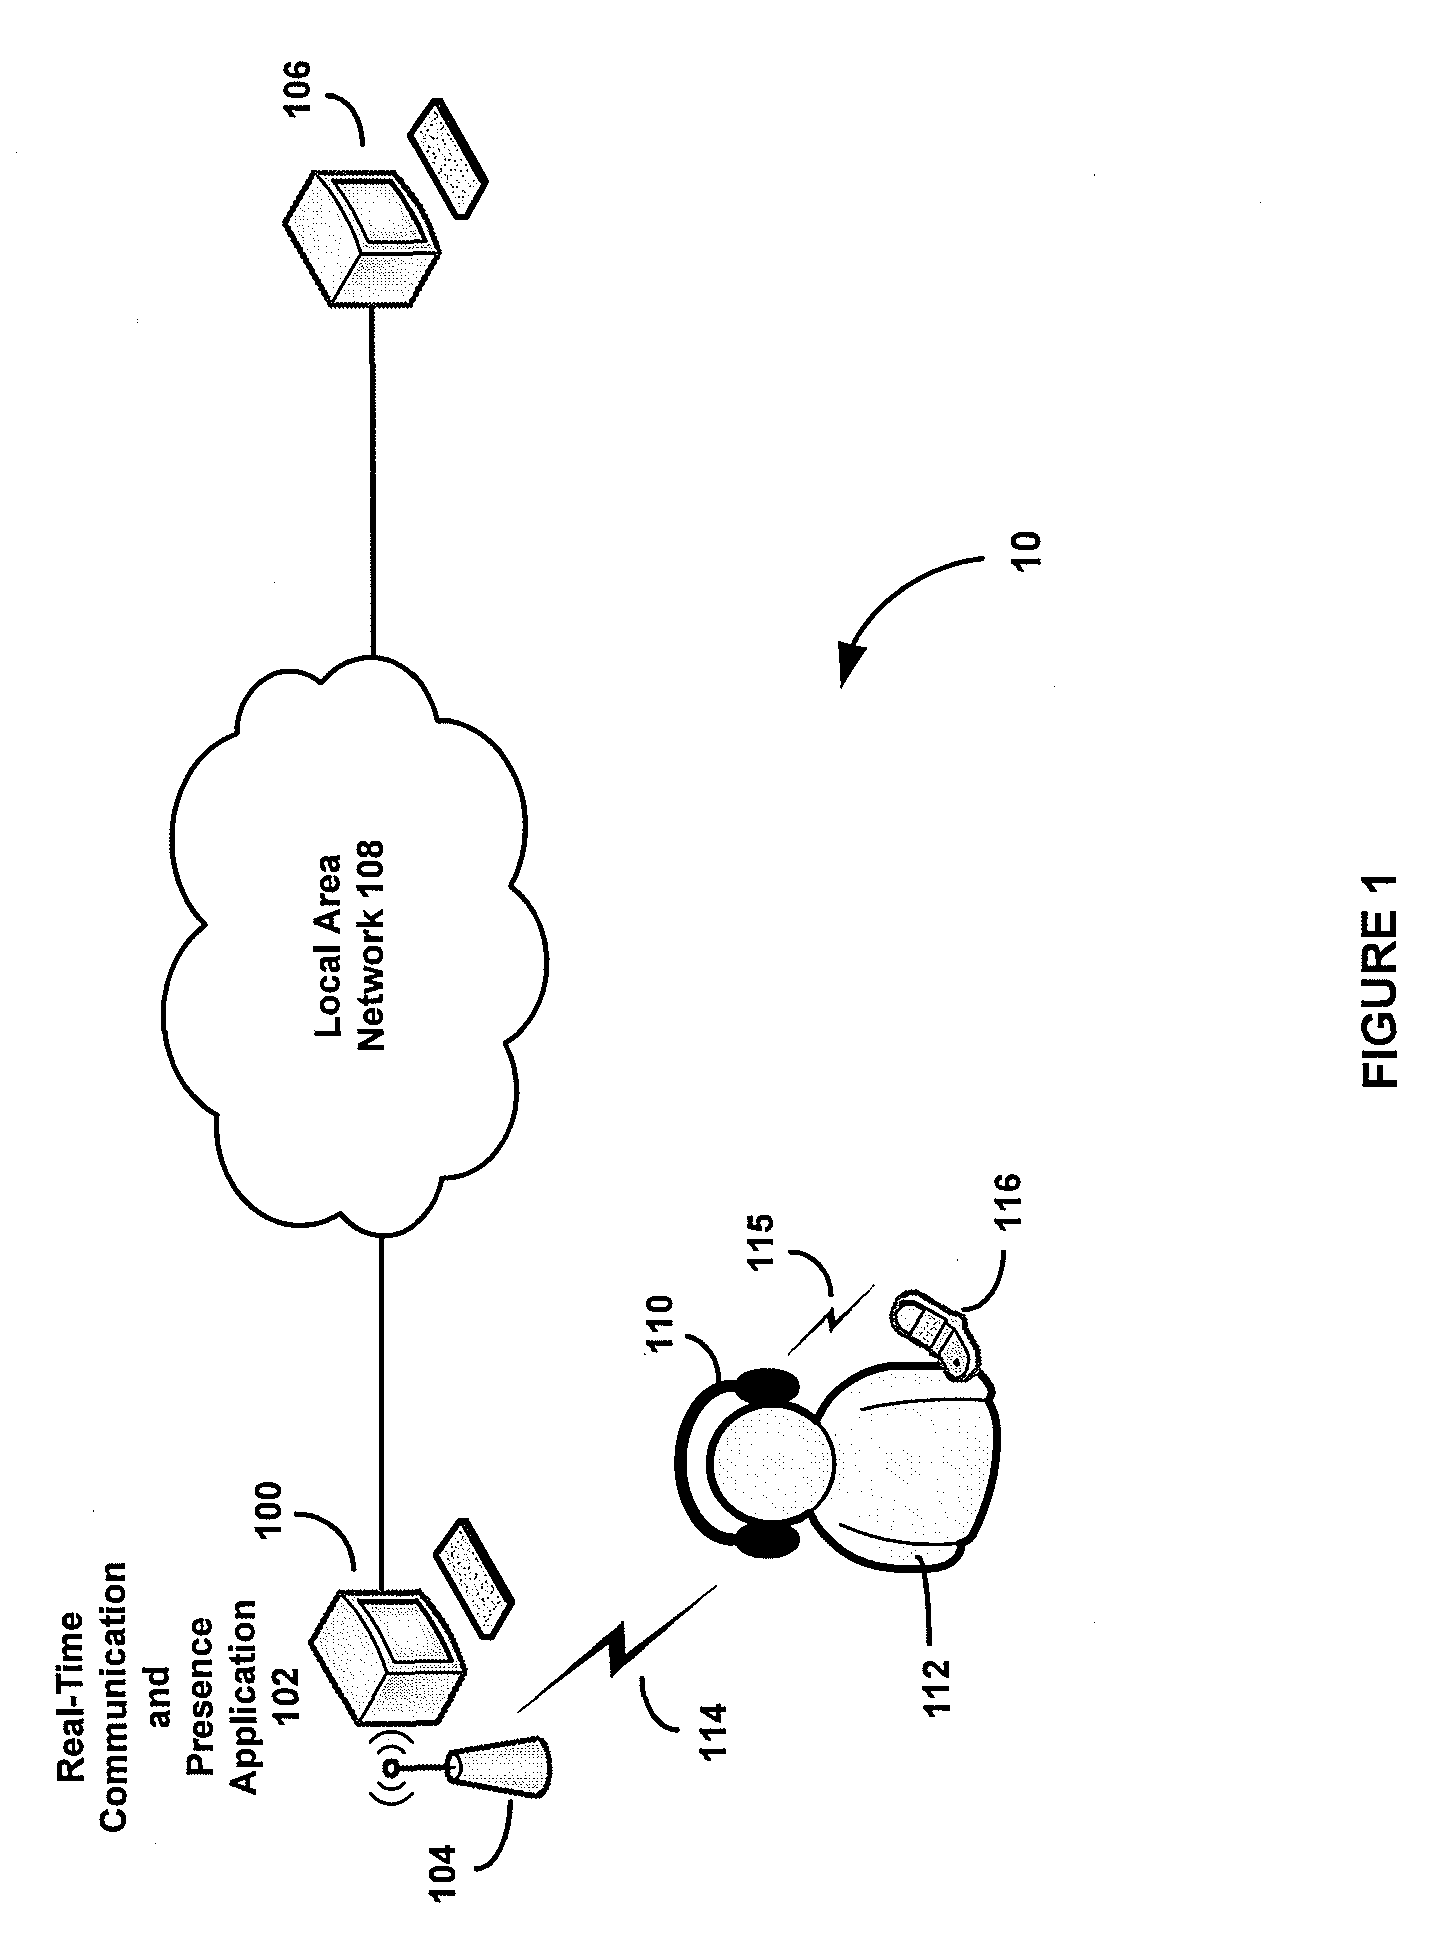 Headset-derived real-time presence and communication systems and methods